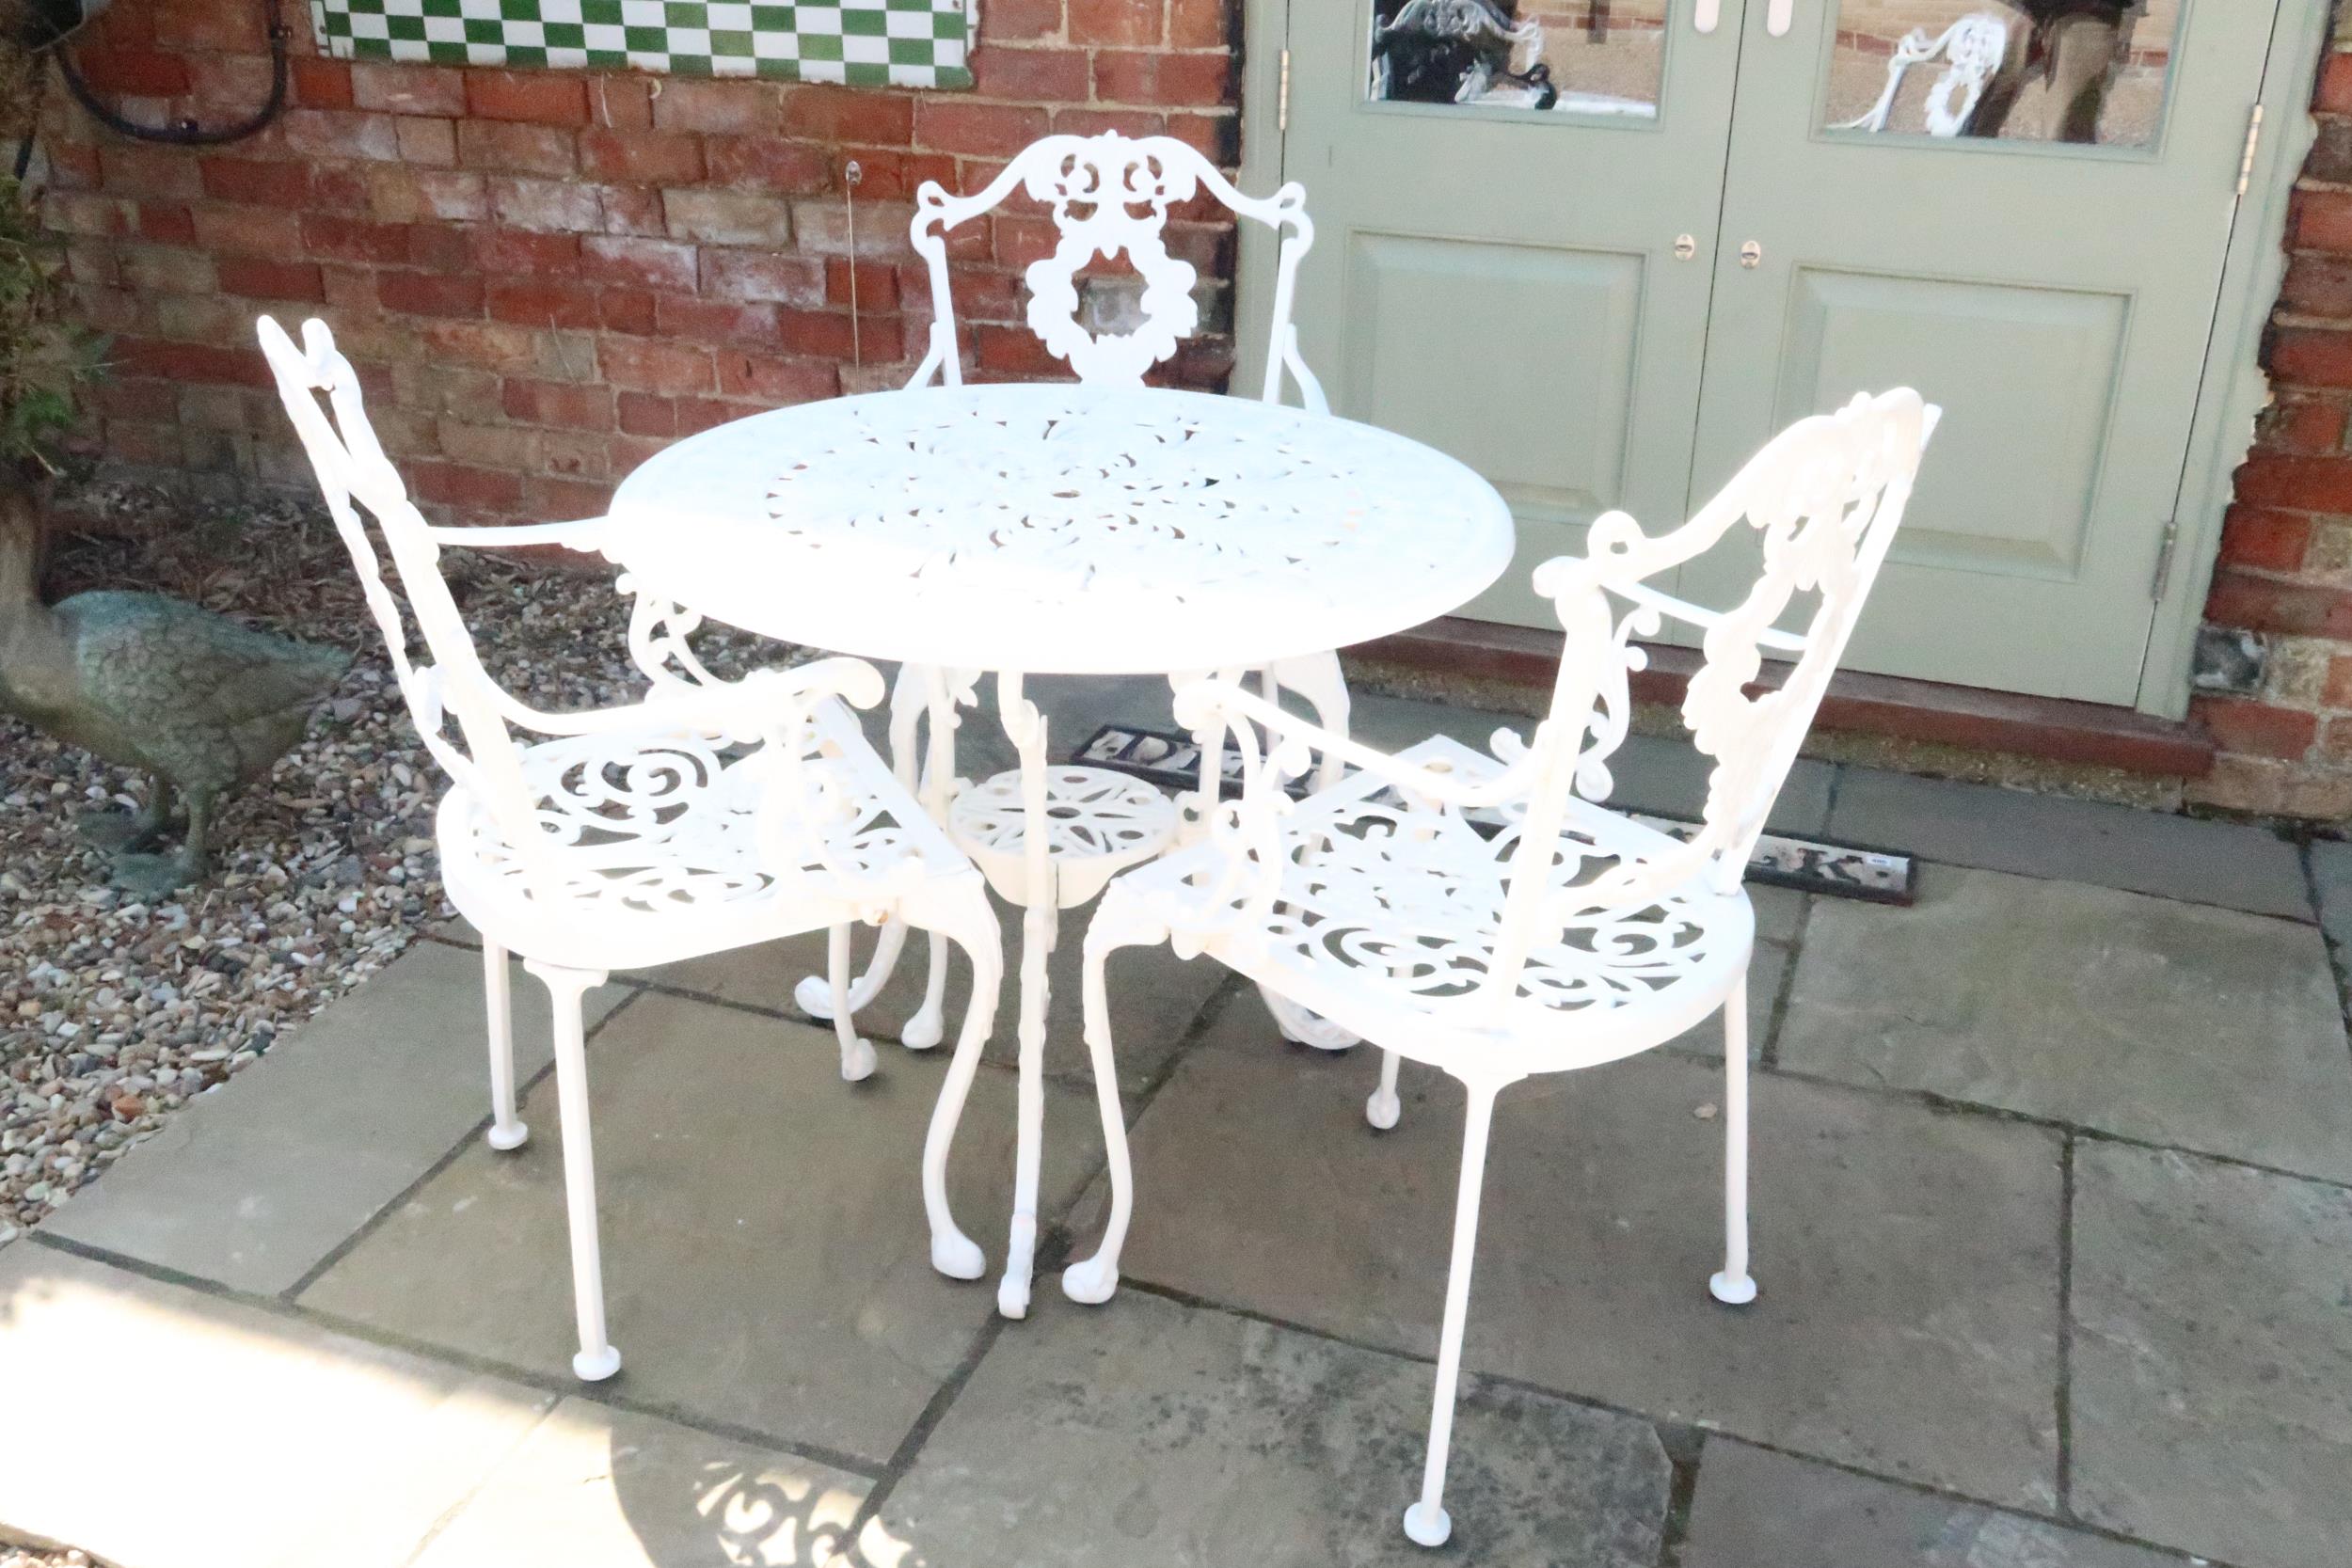 A cast iron garden table and three chairs - Diameter 81.5cm x Height 68cm